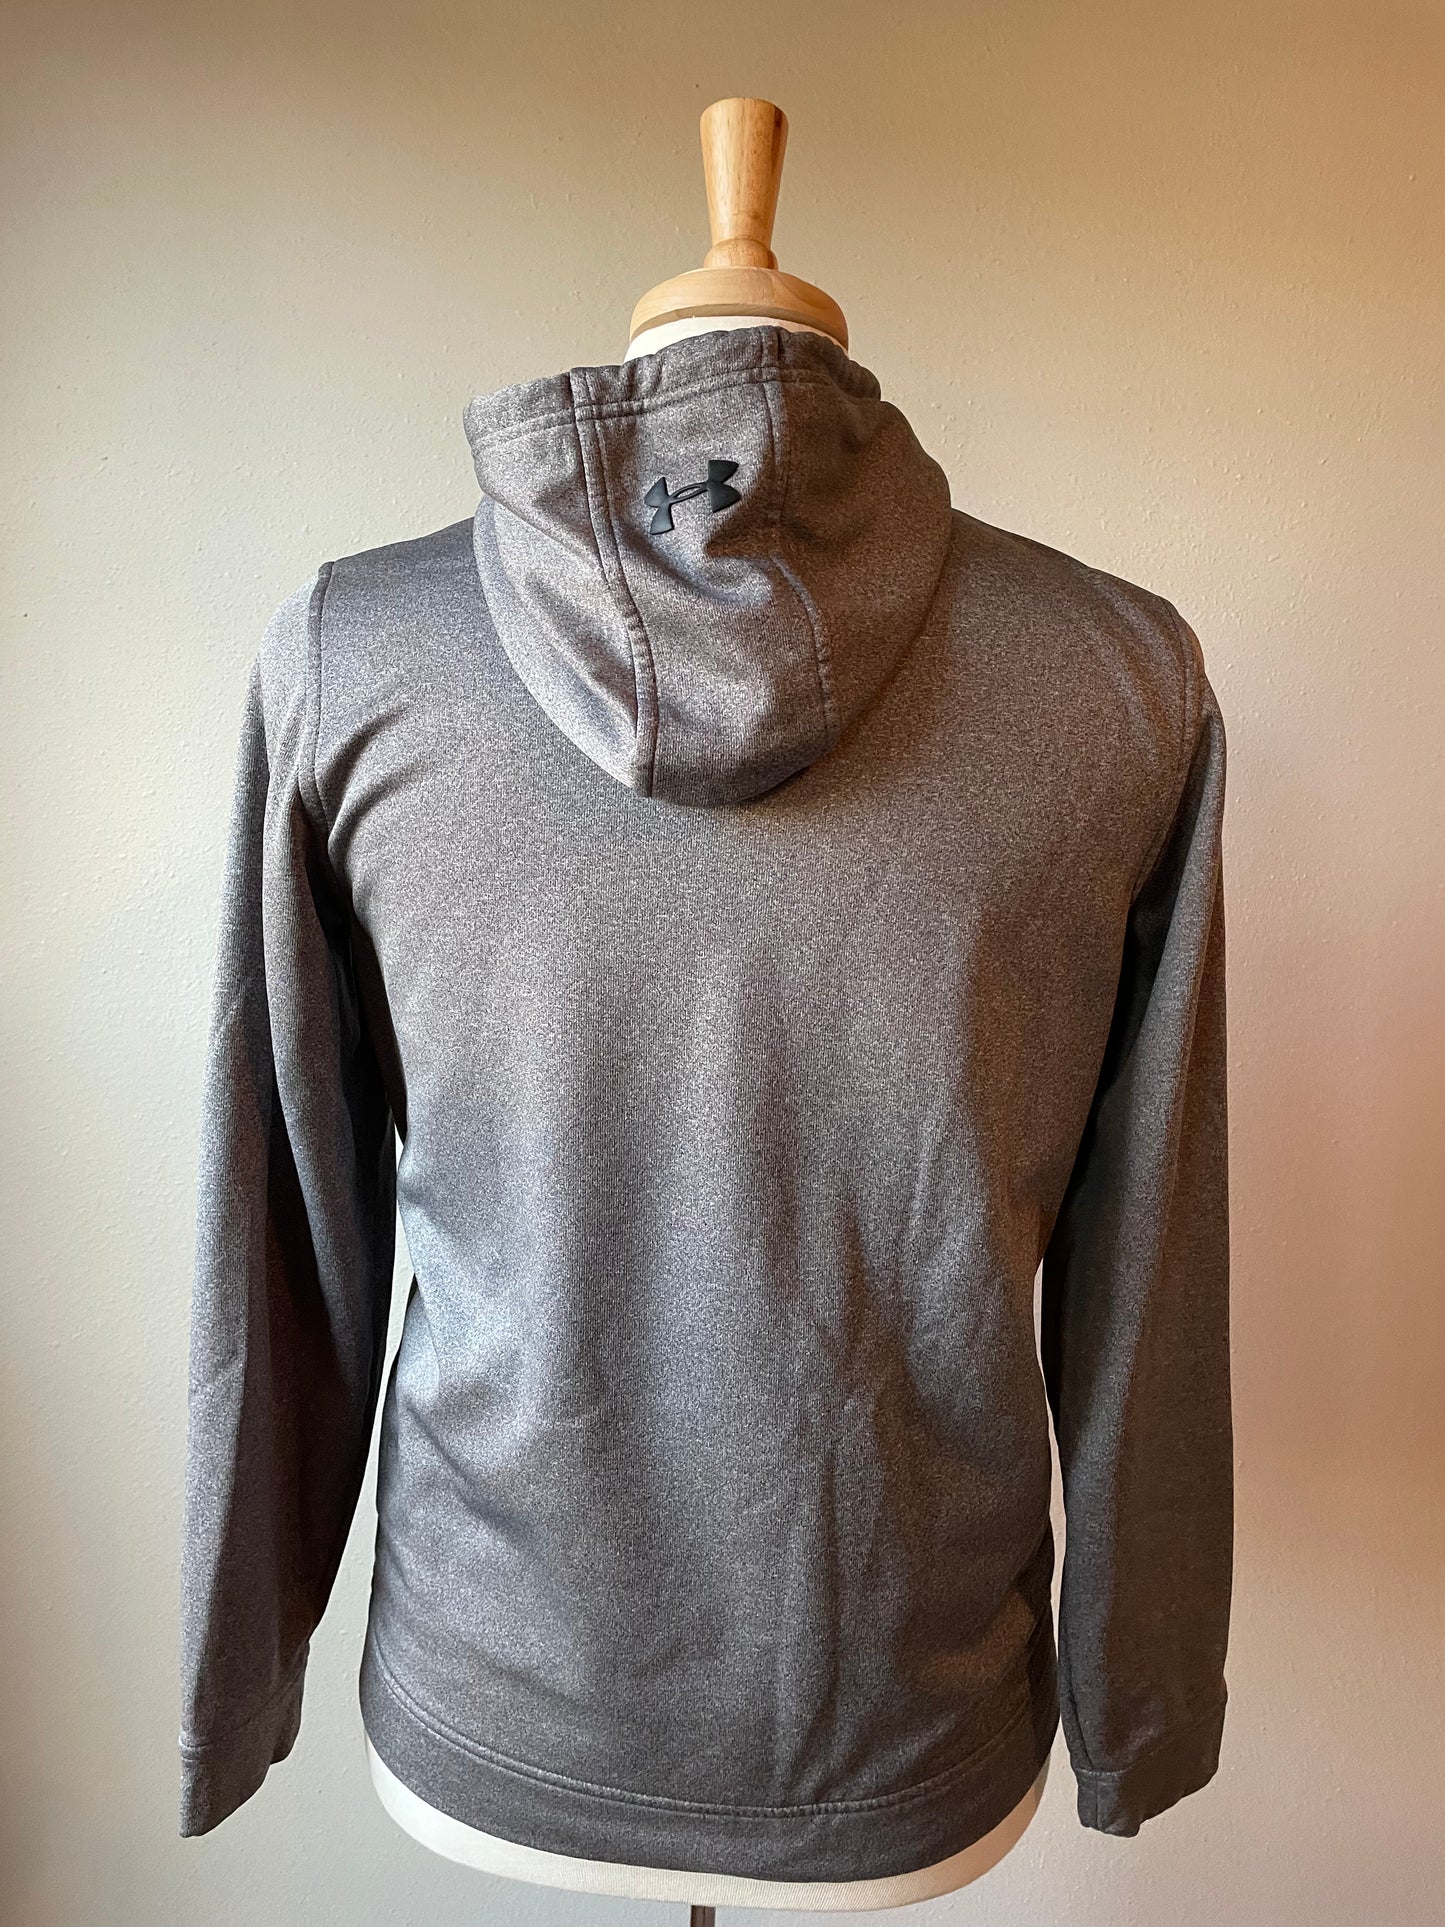 Under Armour Cold Gear Gray Hoodie (M)